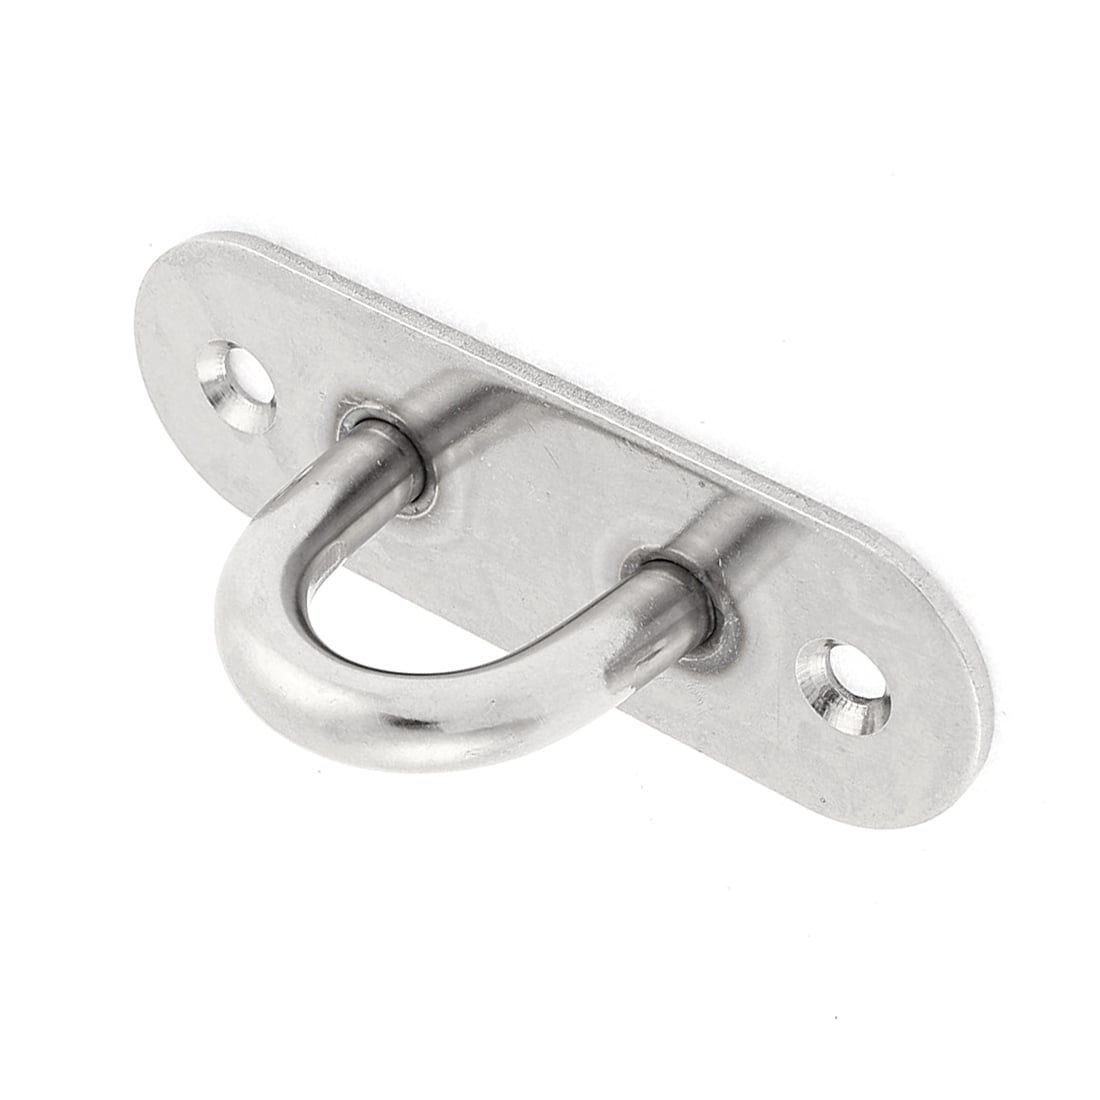 show original title Details about   Augplatten Mounting Awning Wall Hook Stainless Steel V4A augplatte Eyelet Plate 